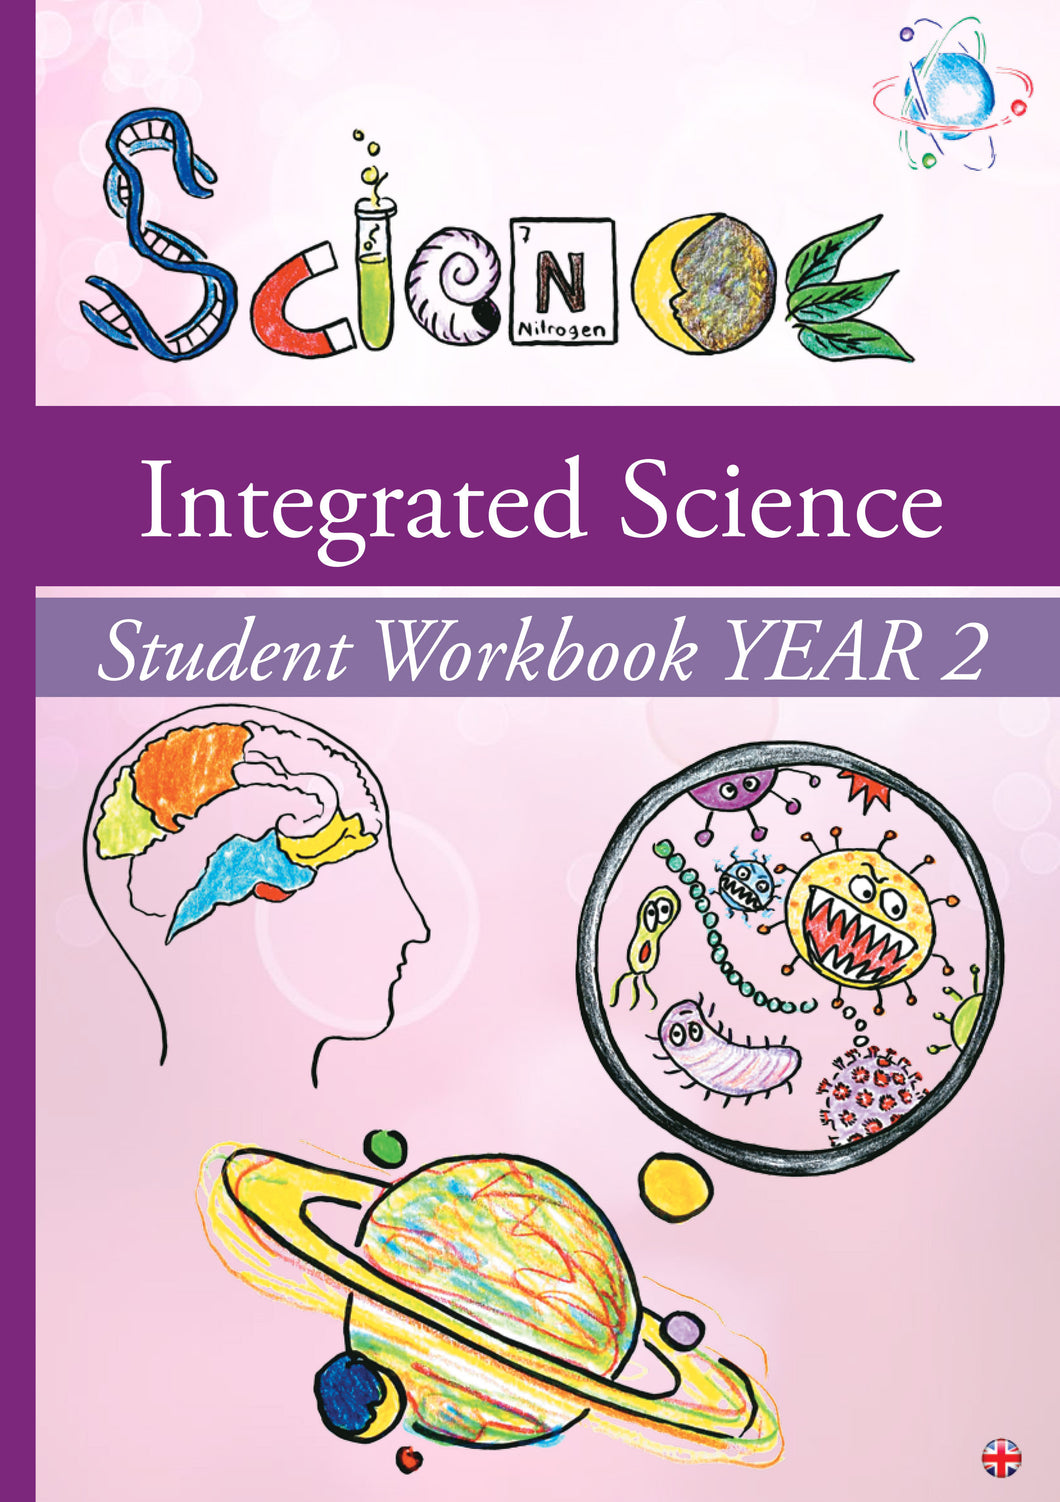 INTEGRATED SCIENCE - Student Workbook Year 2